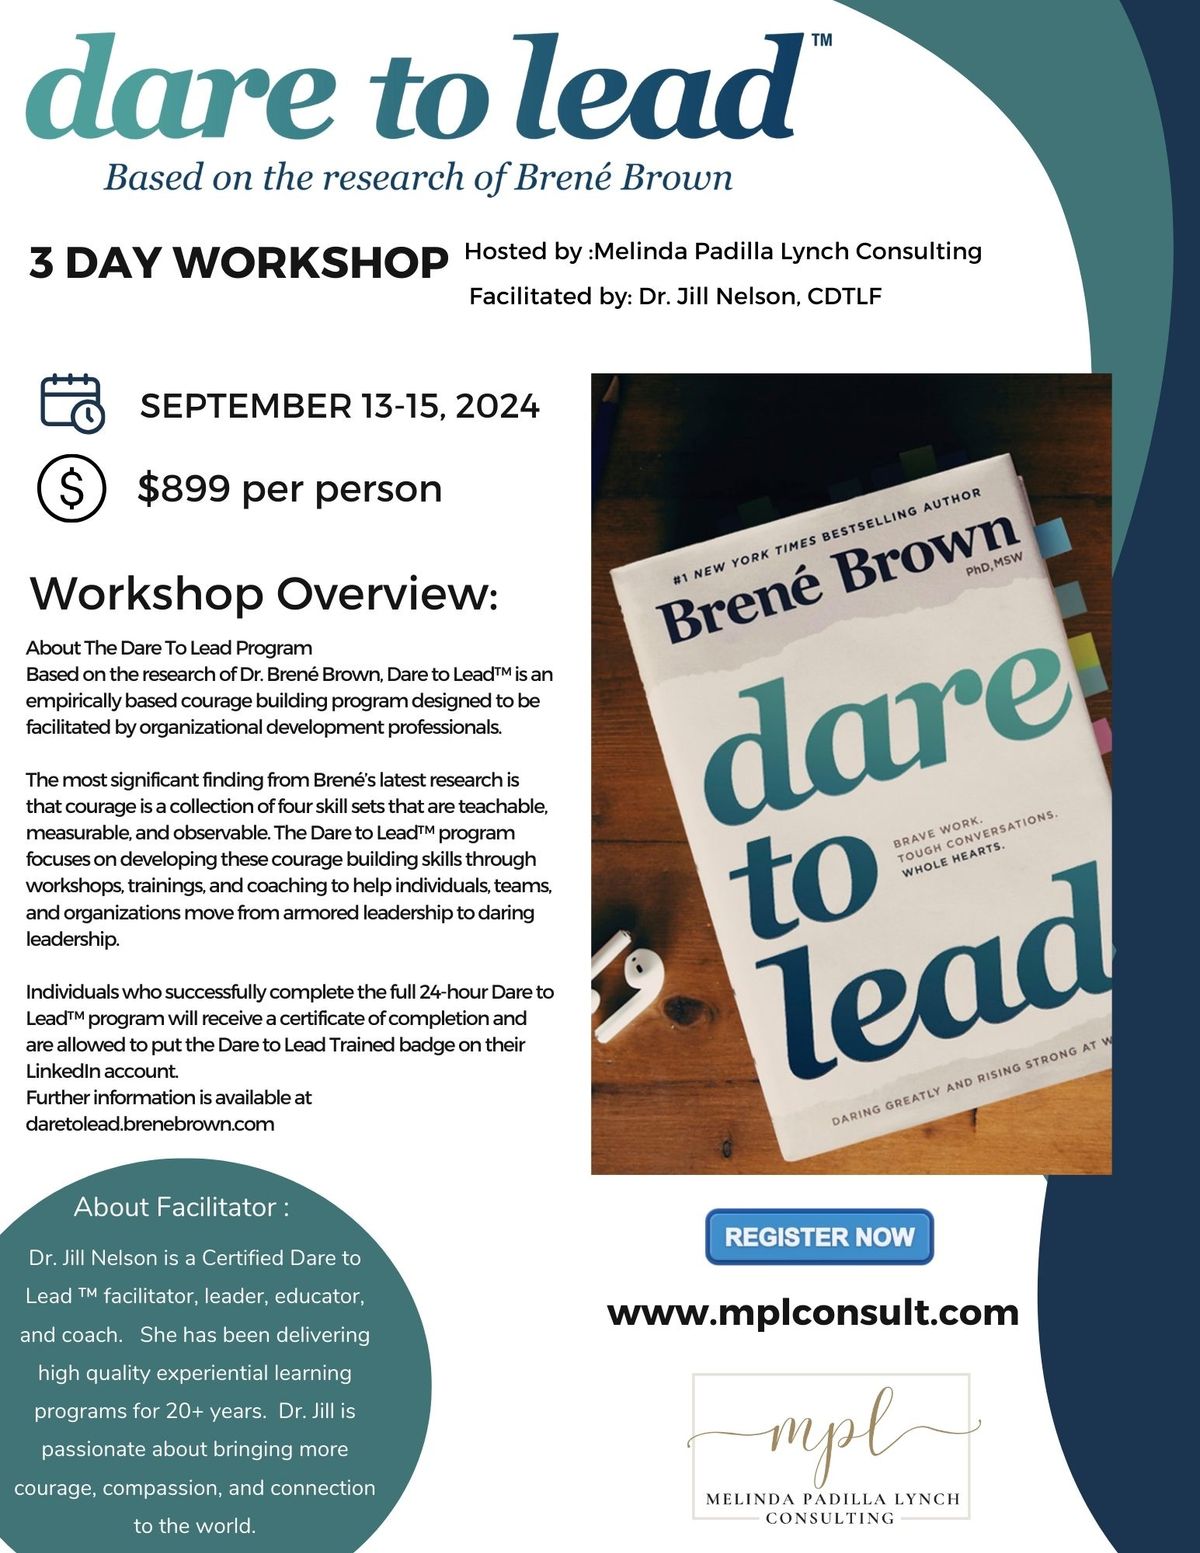 Dare to Lead 3 Day Workshop